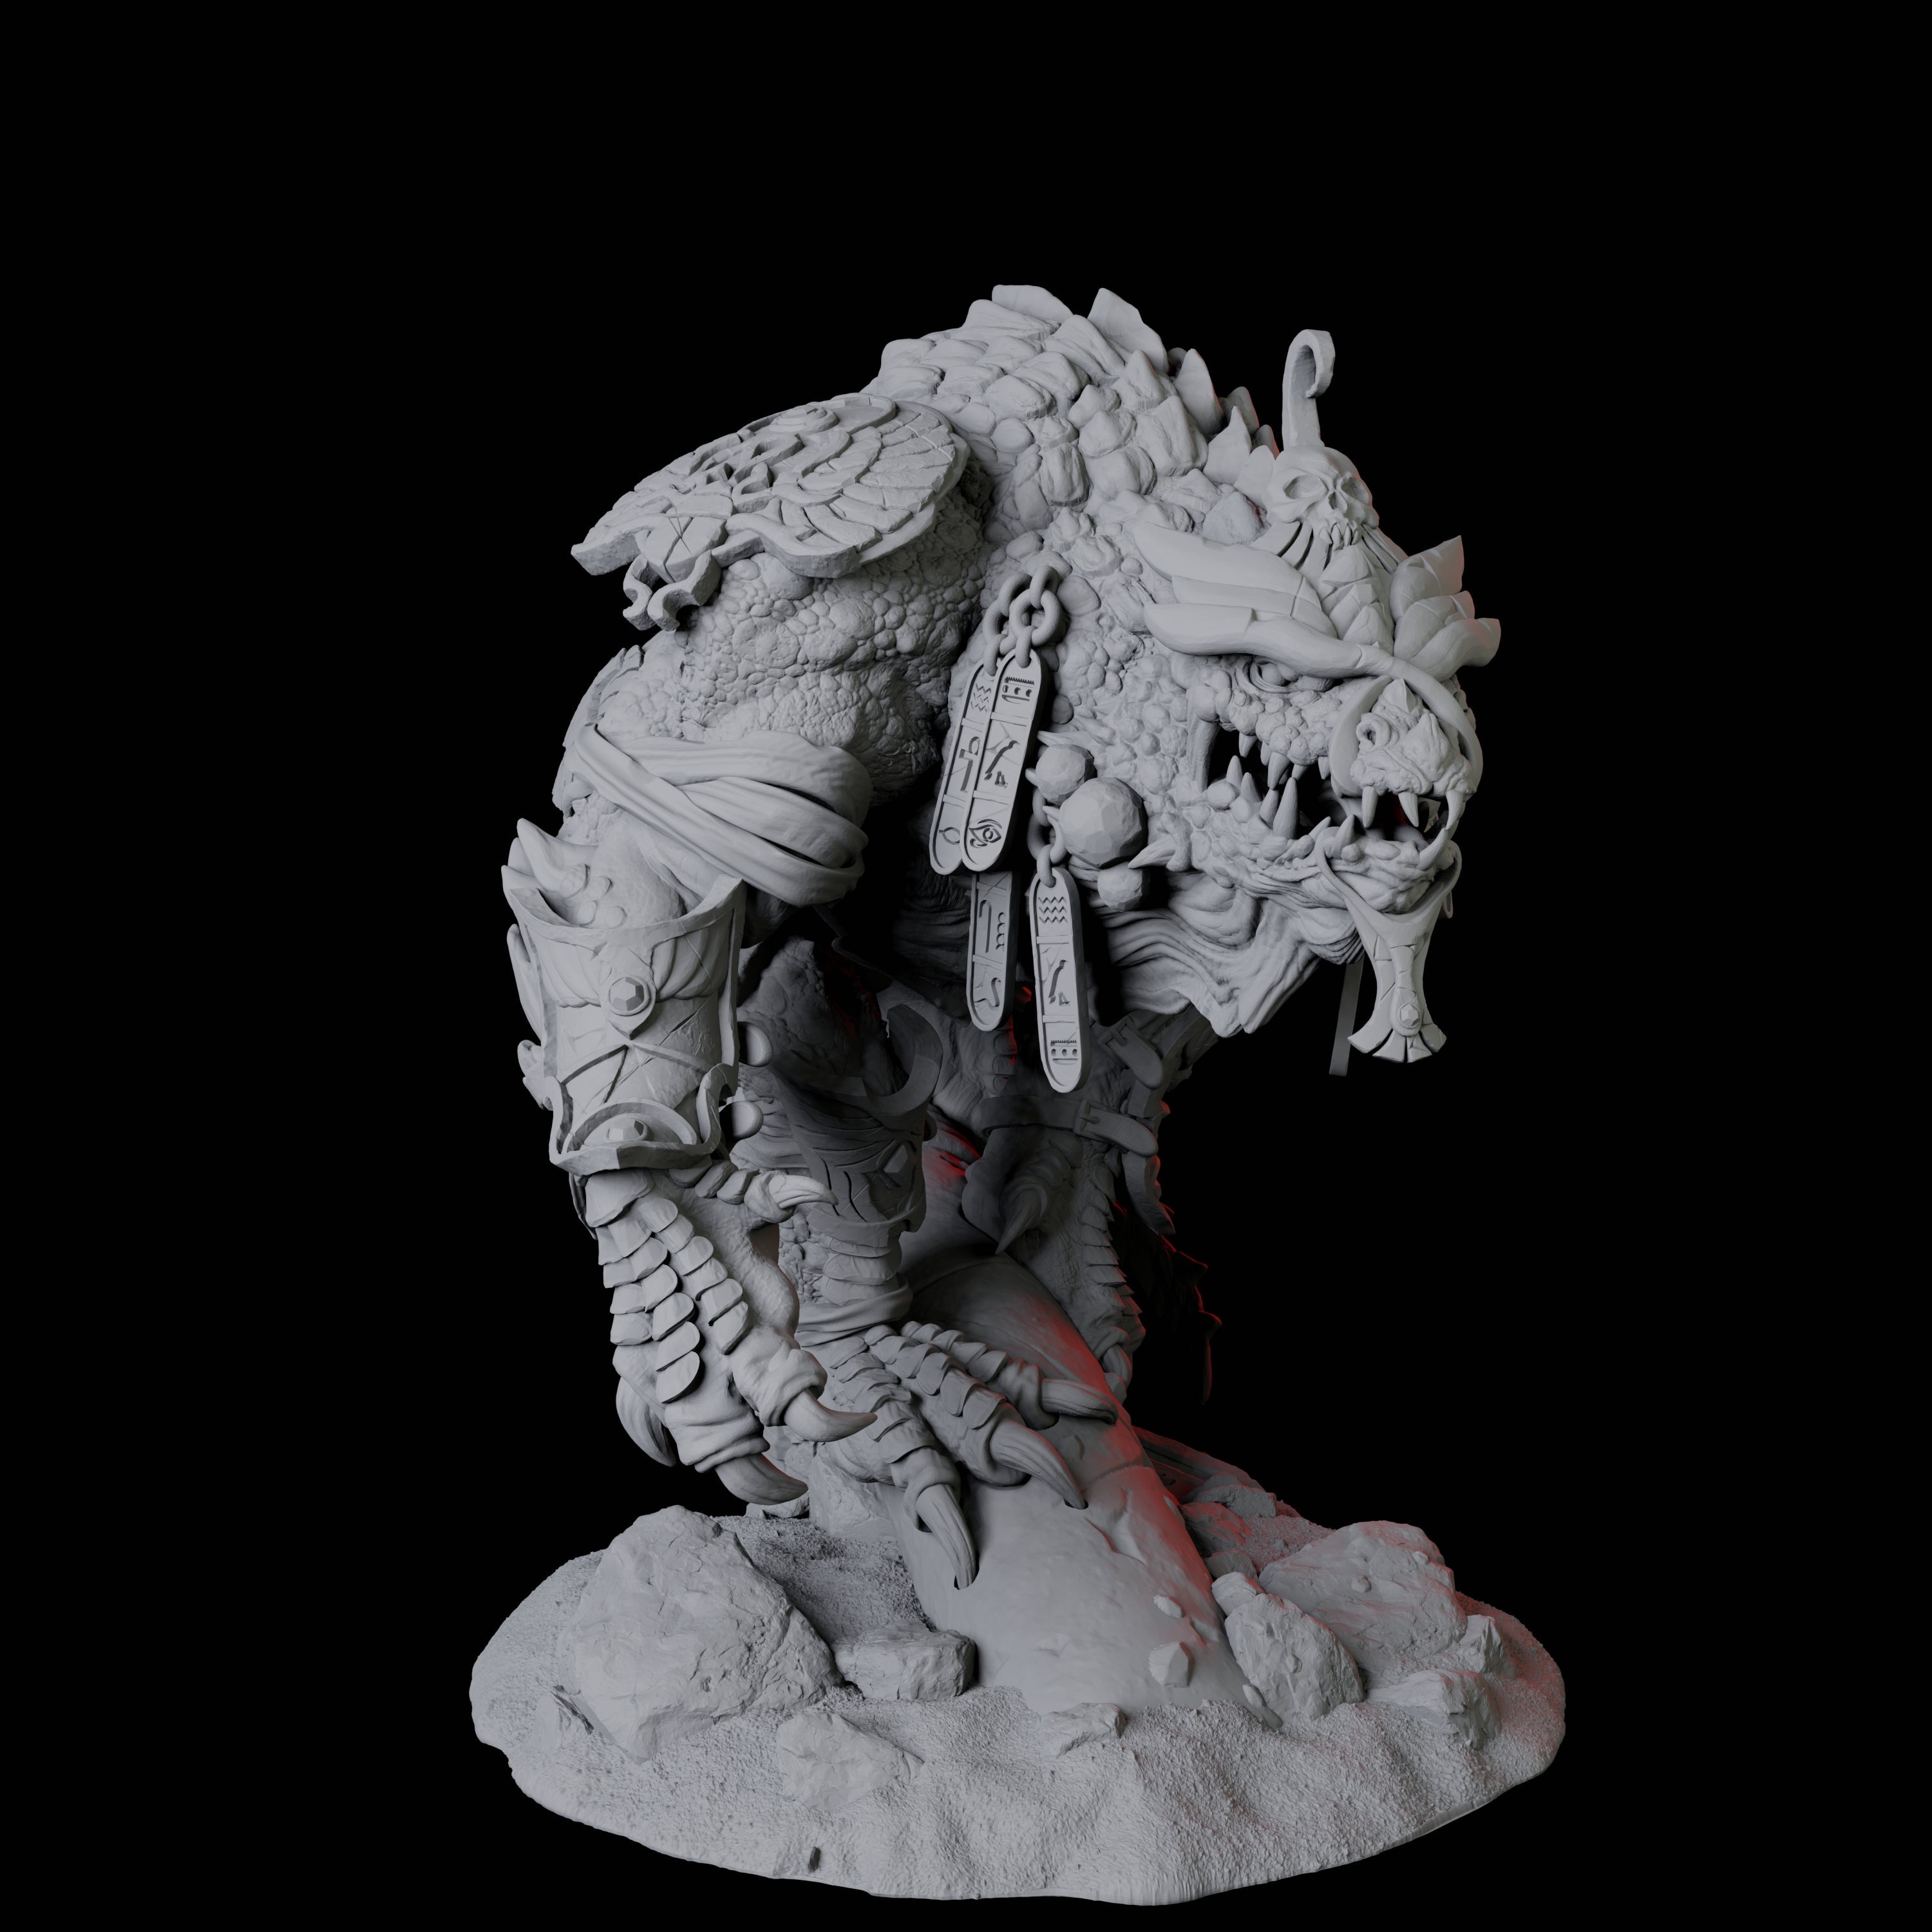 Crocodile Lizardfolk Warrior C Miniature for Dungeons and Dragons, Pathfinder or other TTRPGs